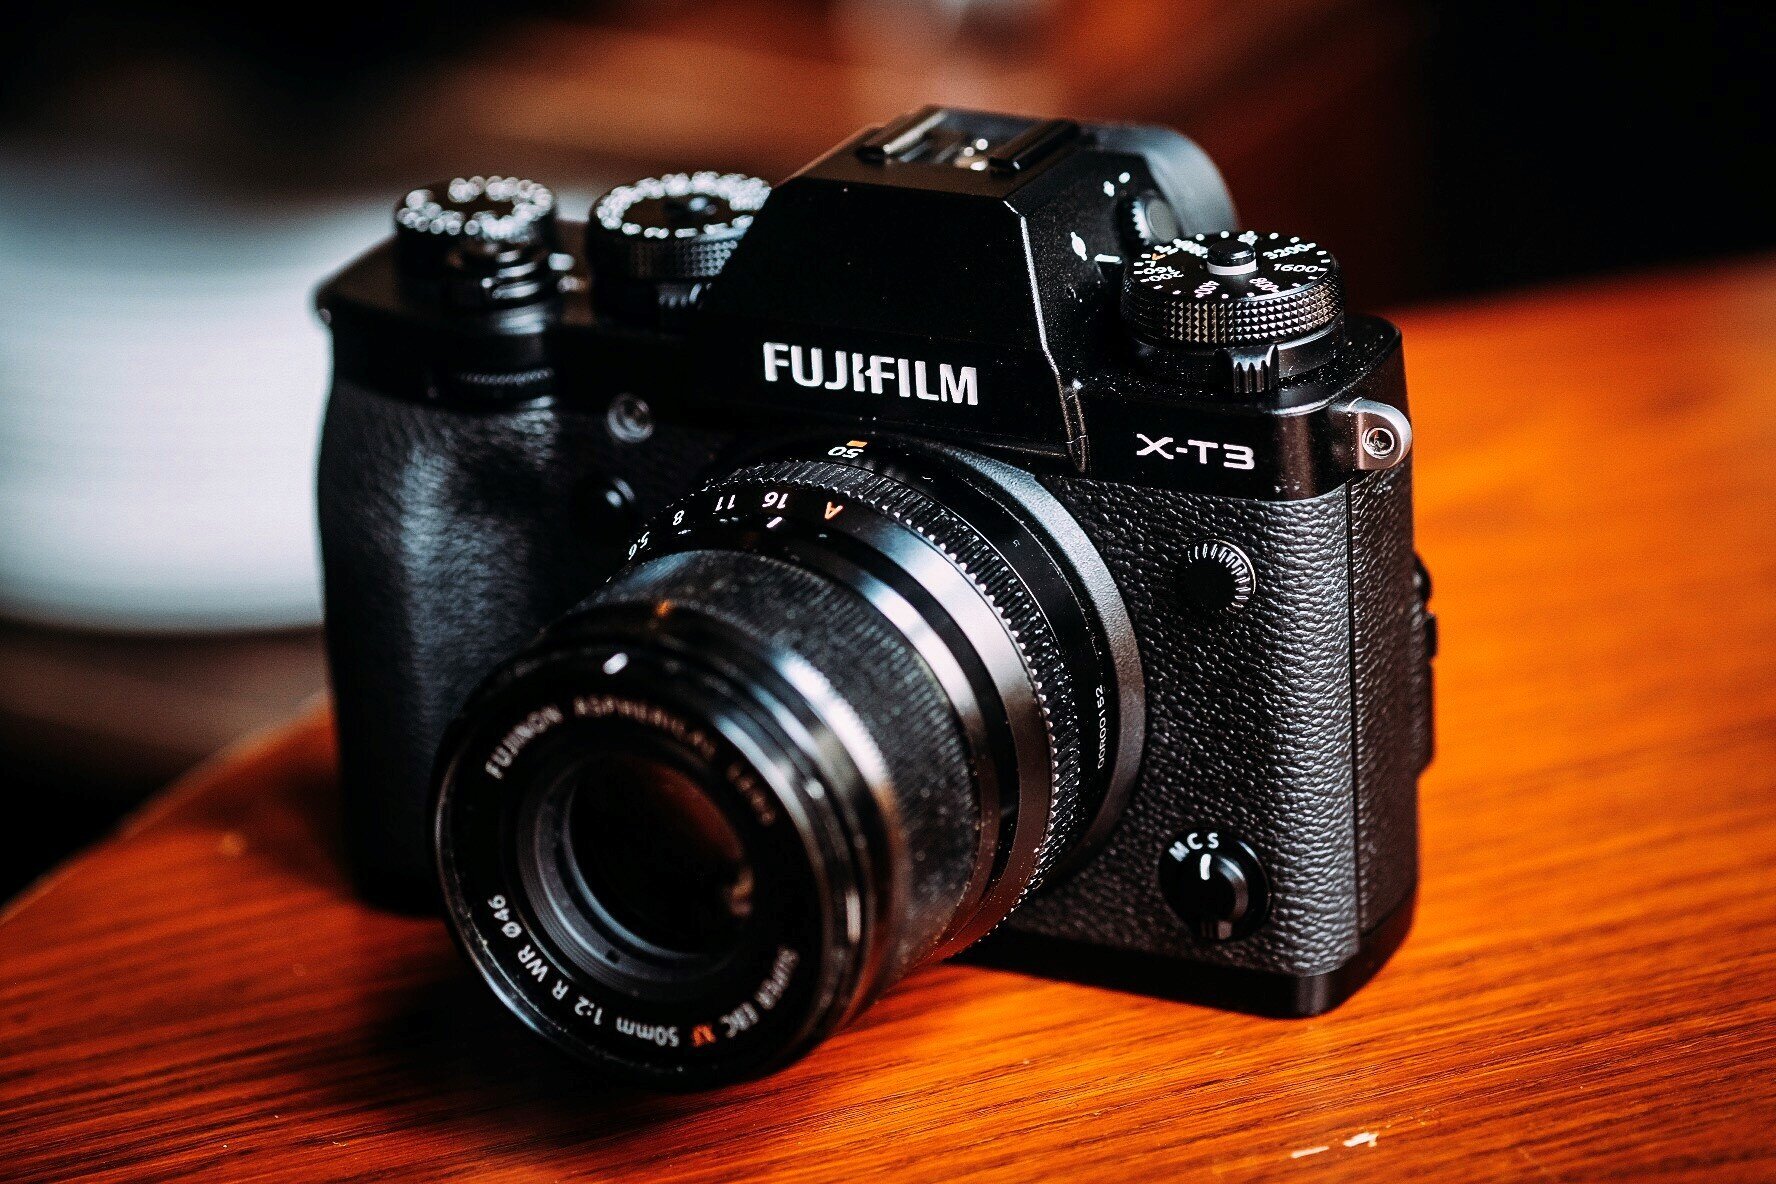 Setting Recommendations for the Fuji X-T3